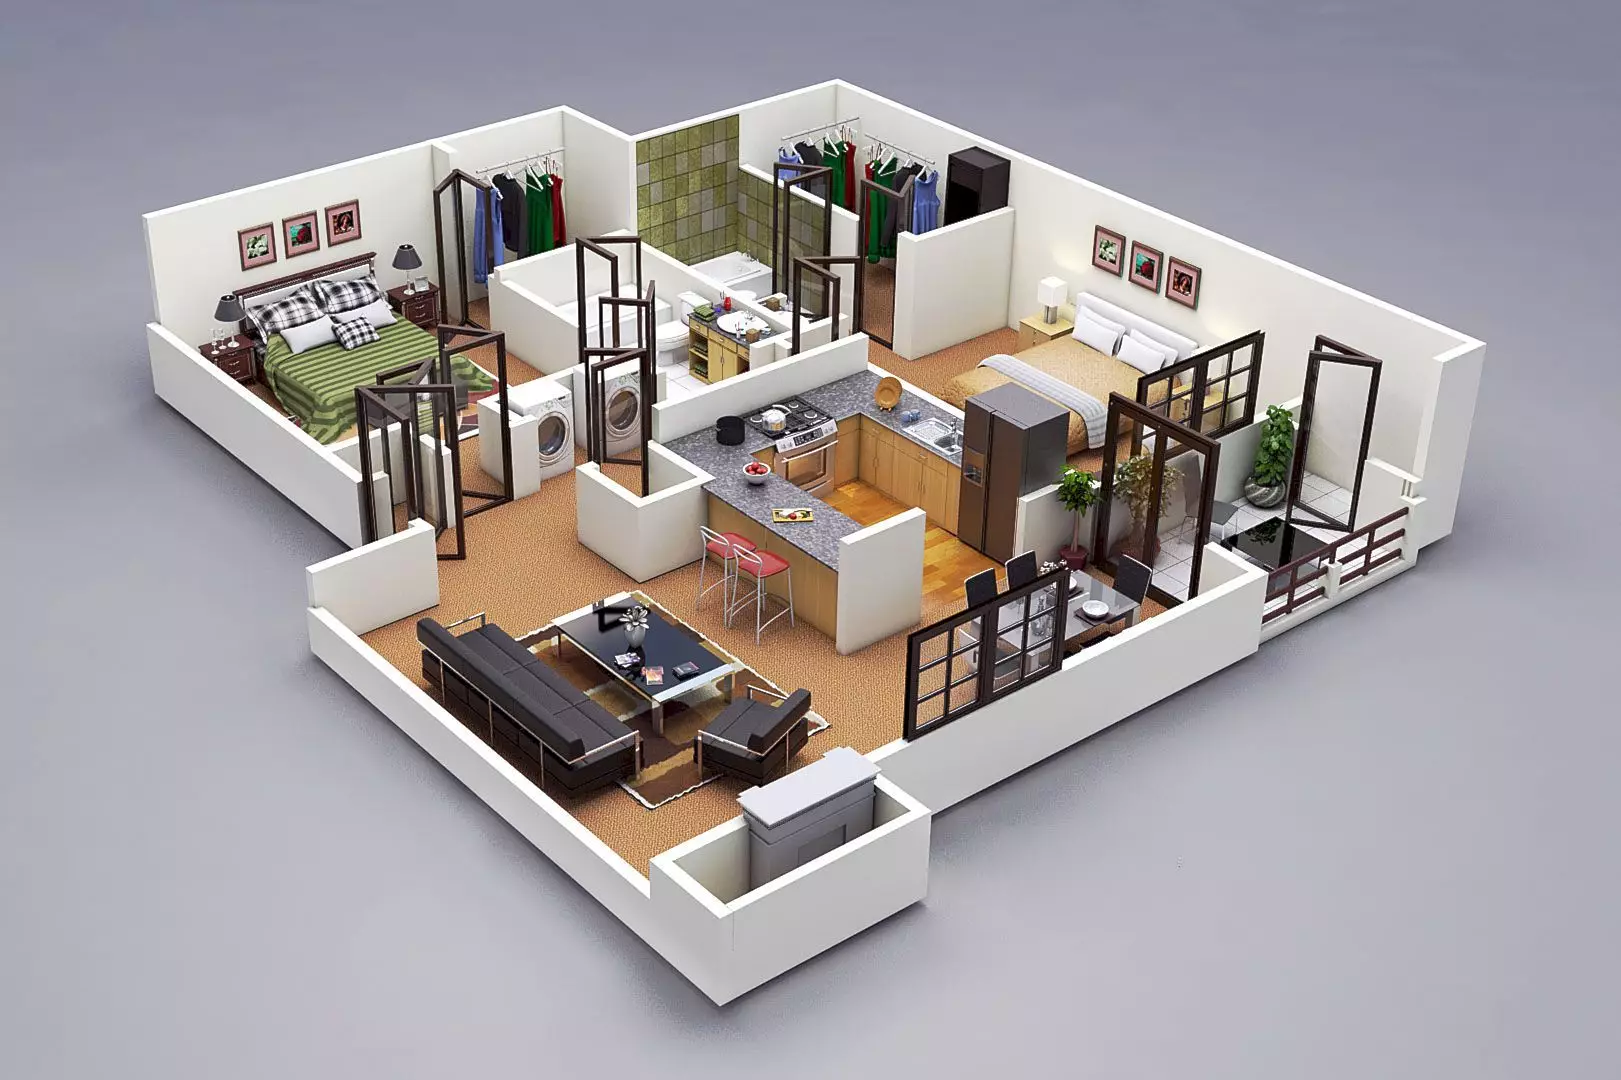 Factors to Consider While Designing a Floor Plan